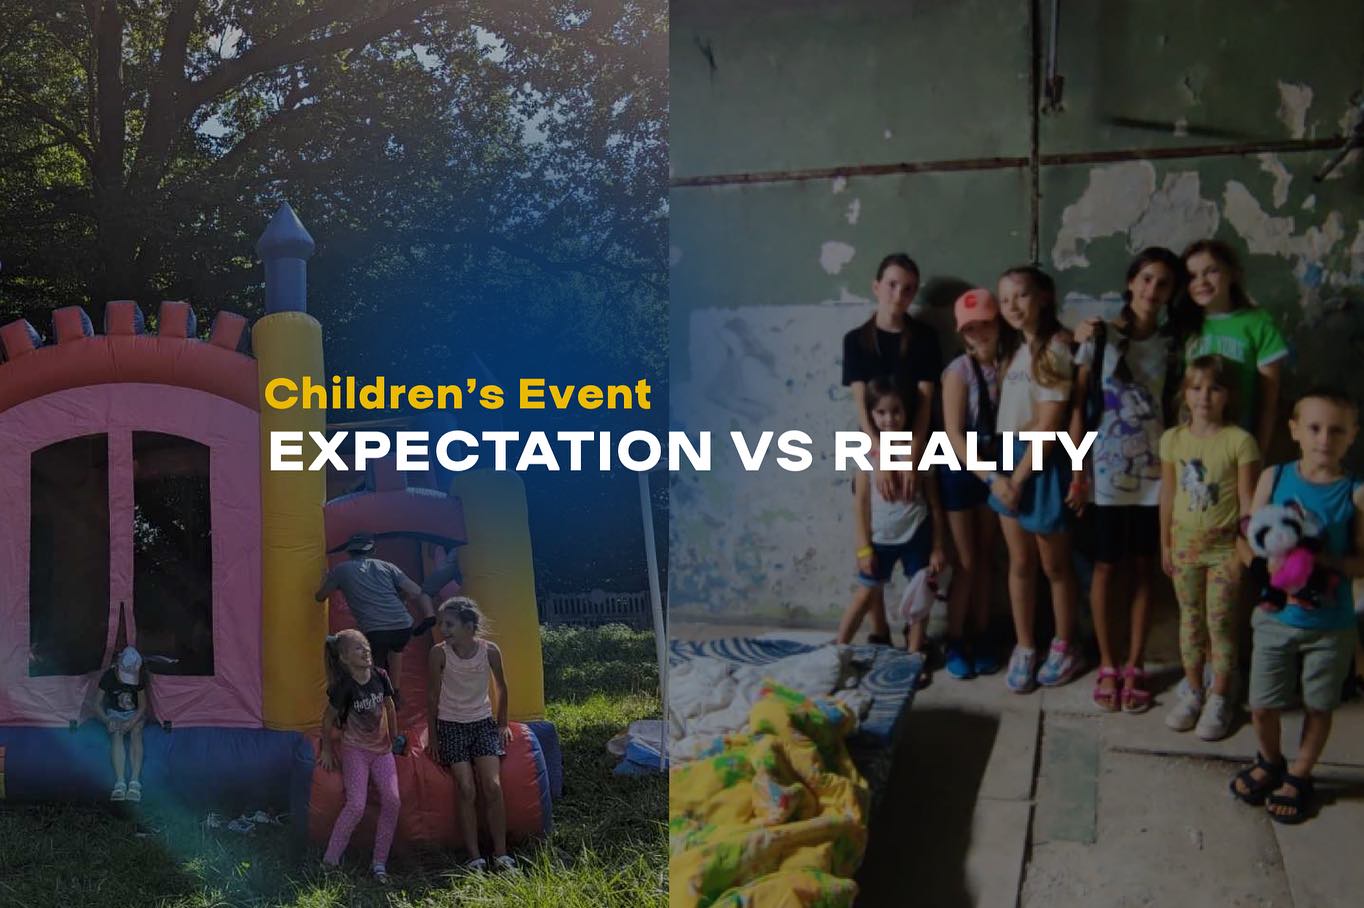 Children's event expectations vs reality.